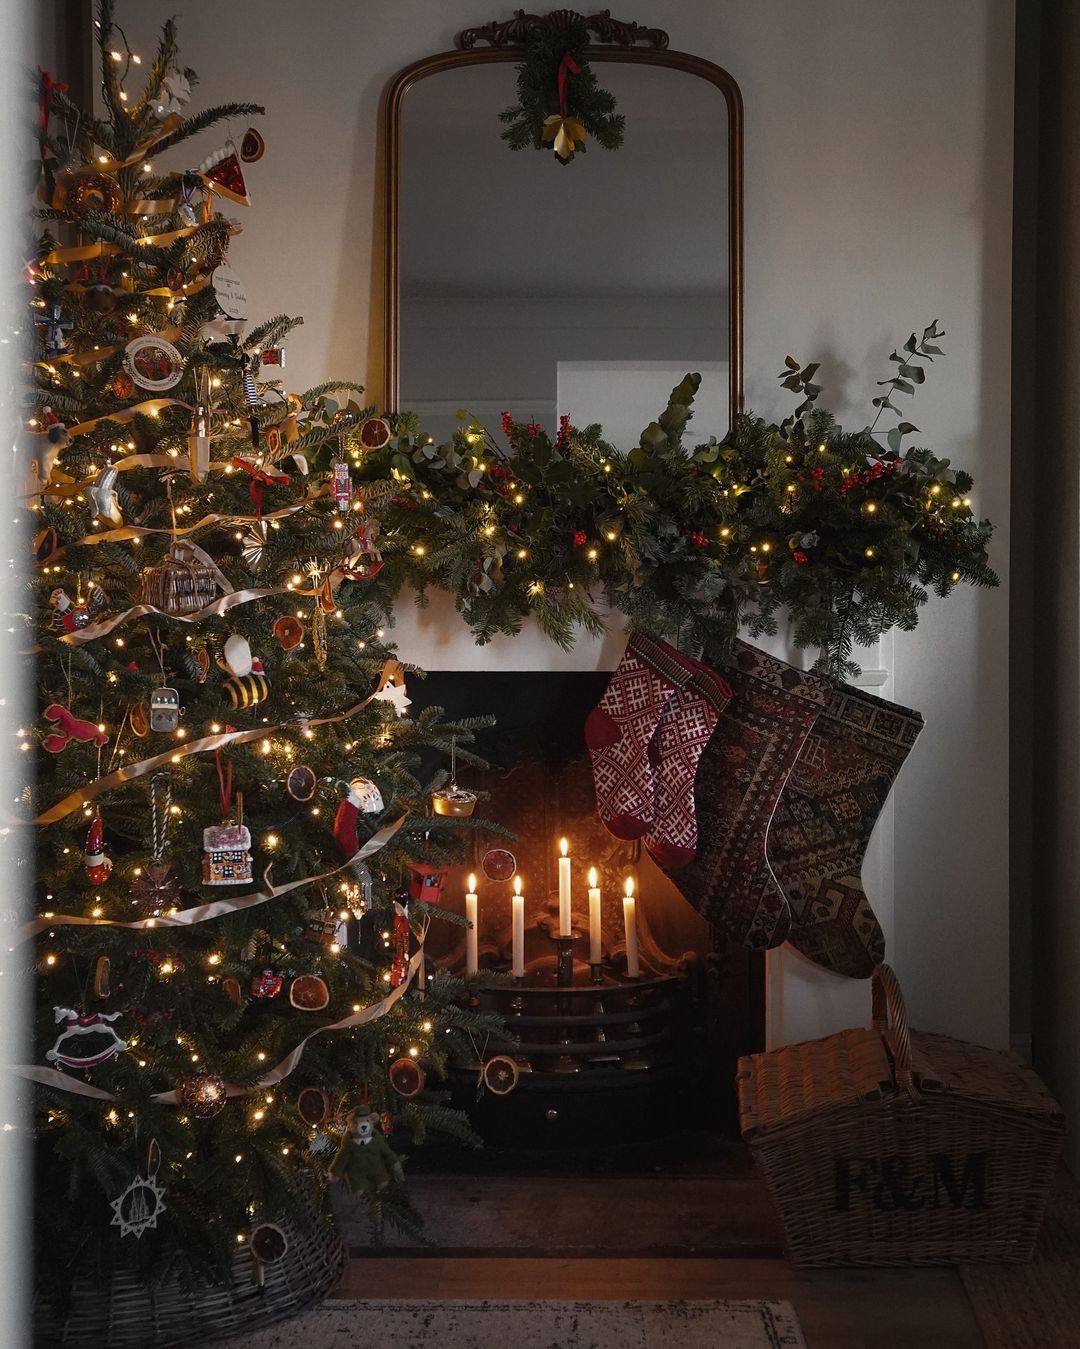 Festive Fireplace Decor with Traditional Candles